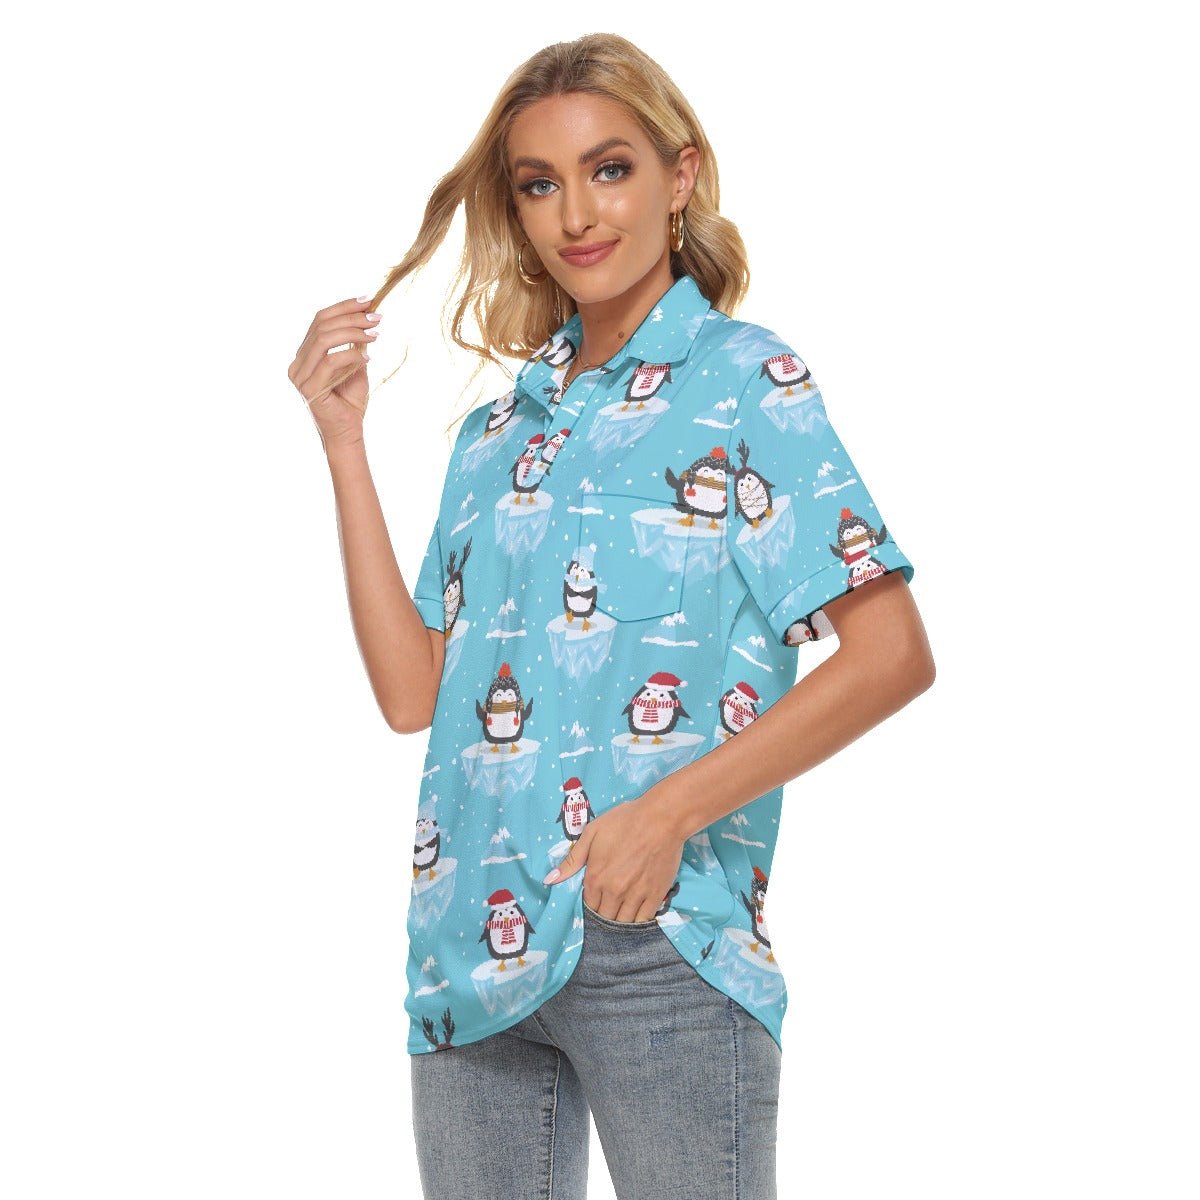 Women's Christmas Polo T-Shirt - Icy Penguins - Festive Style